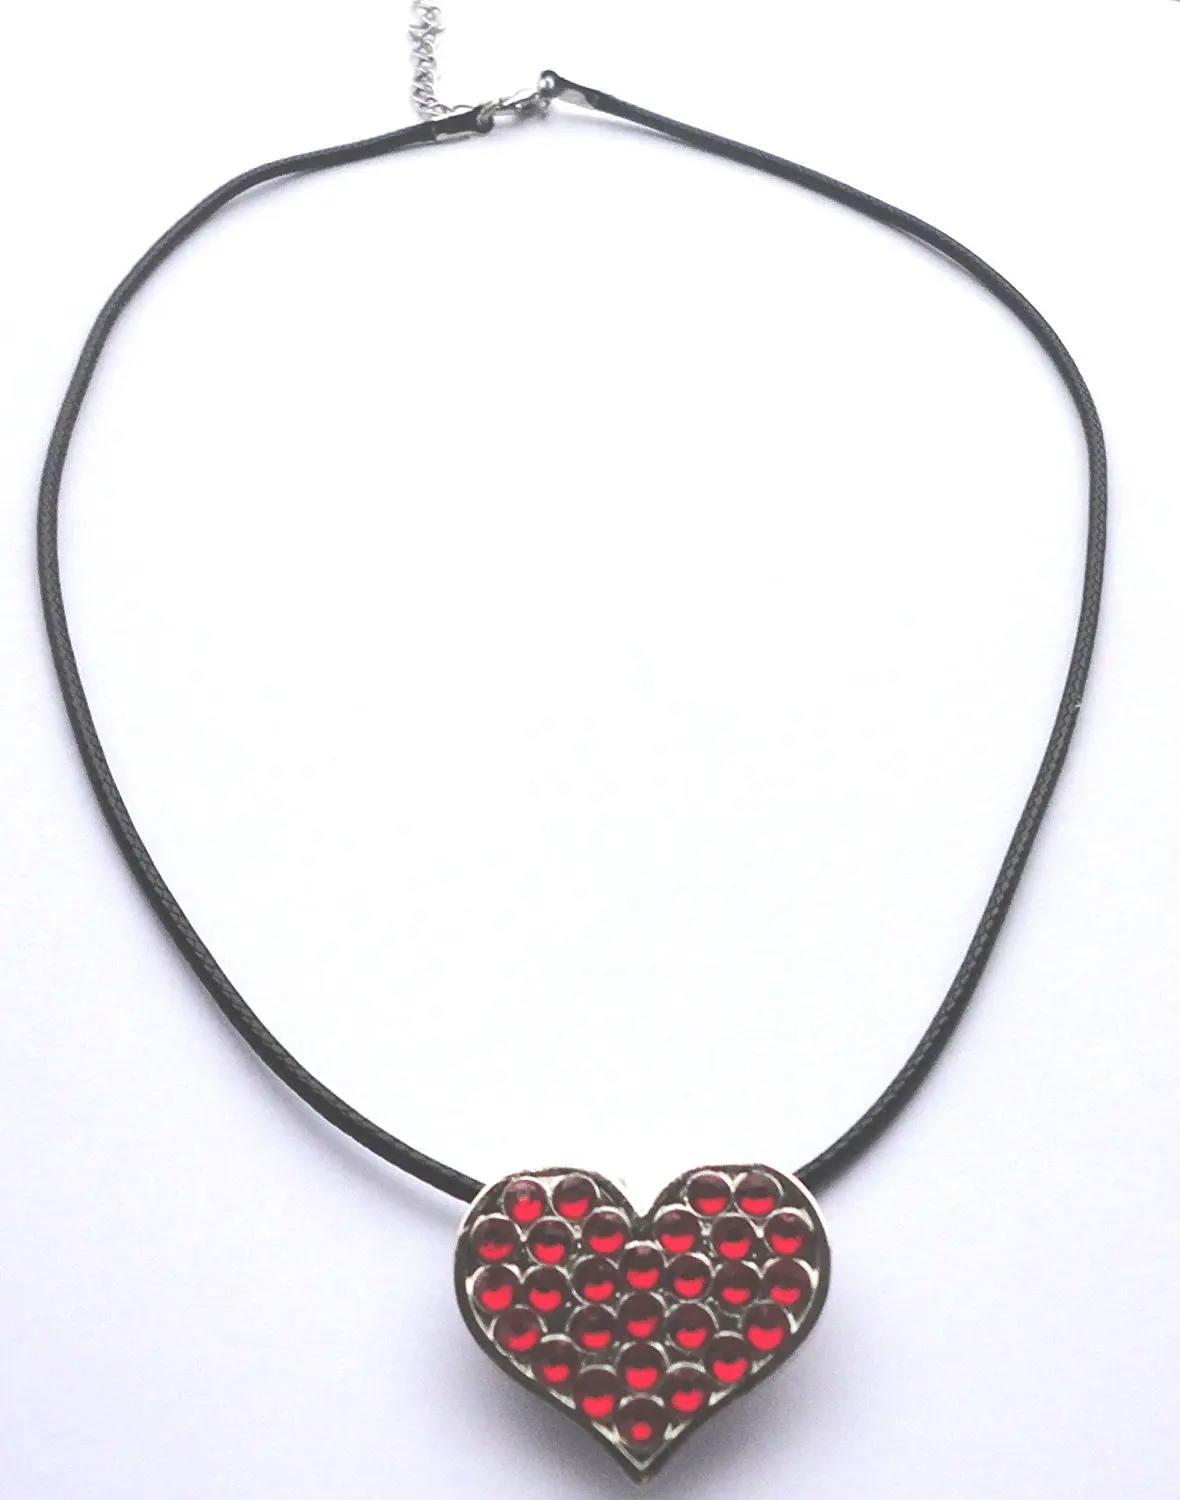 Cheap Small Red Heart Necklace, find Small Red Heart Necklace deals on